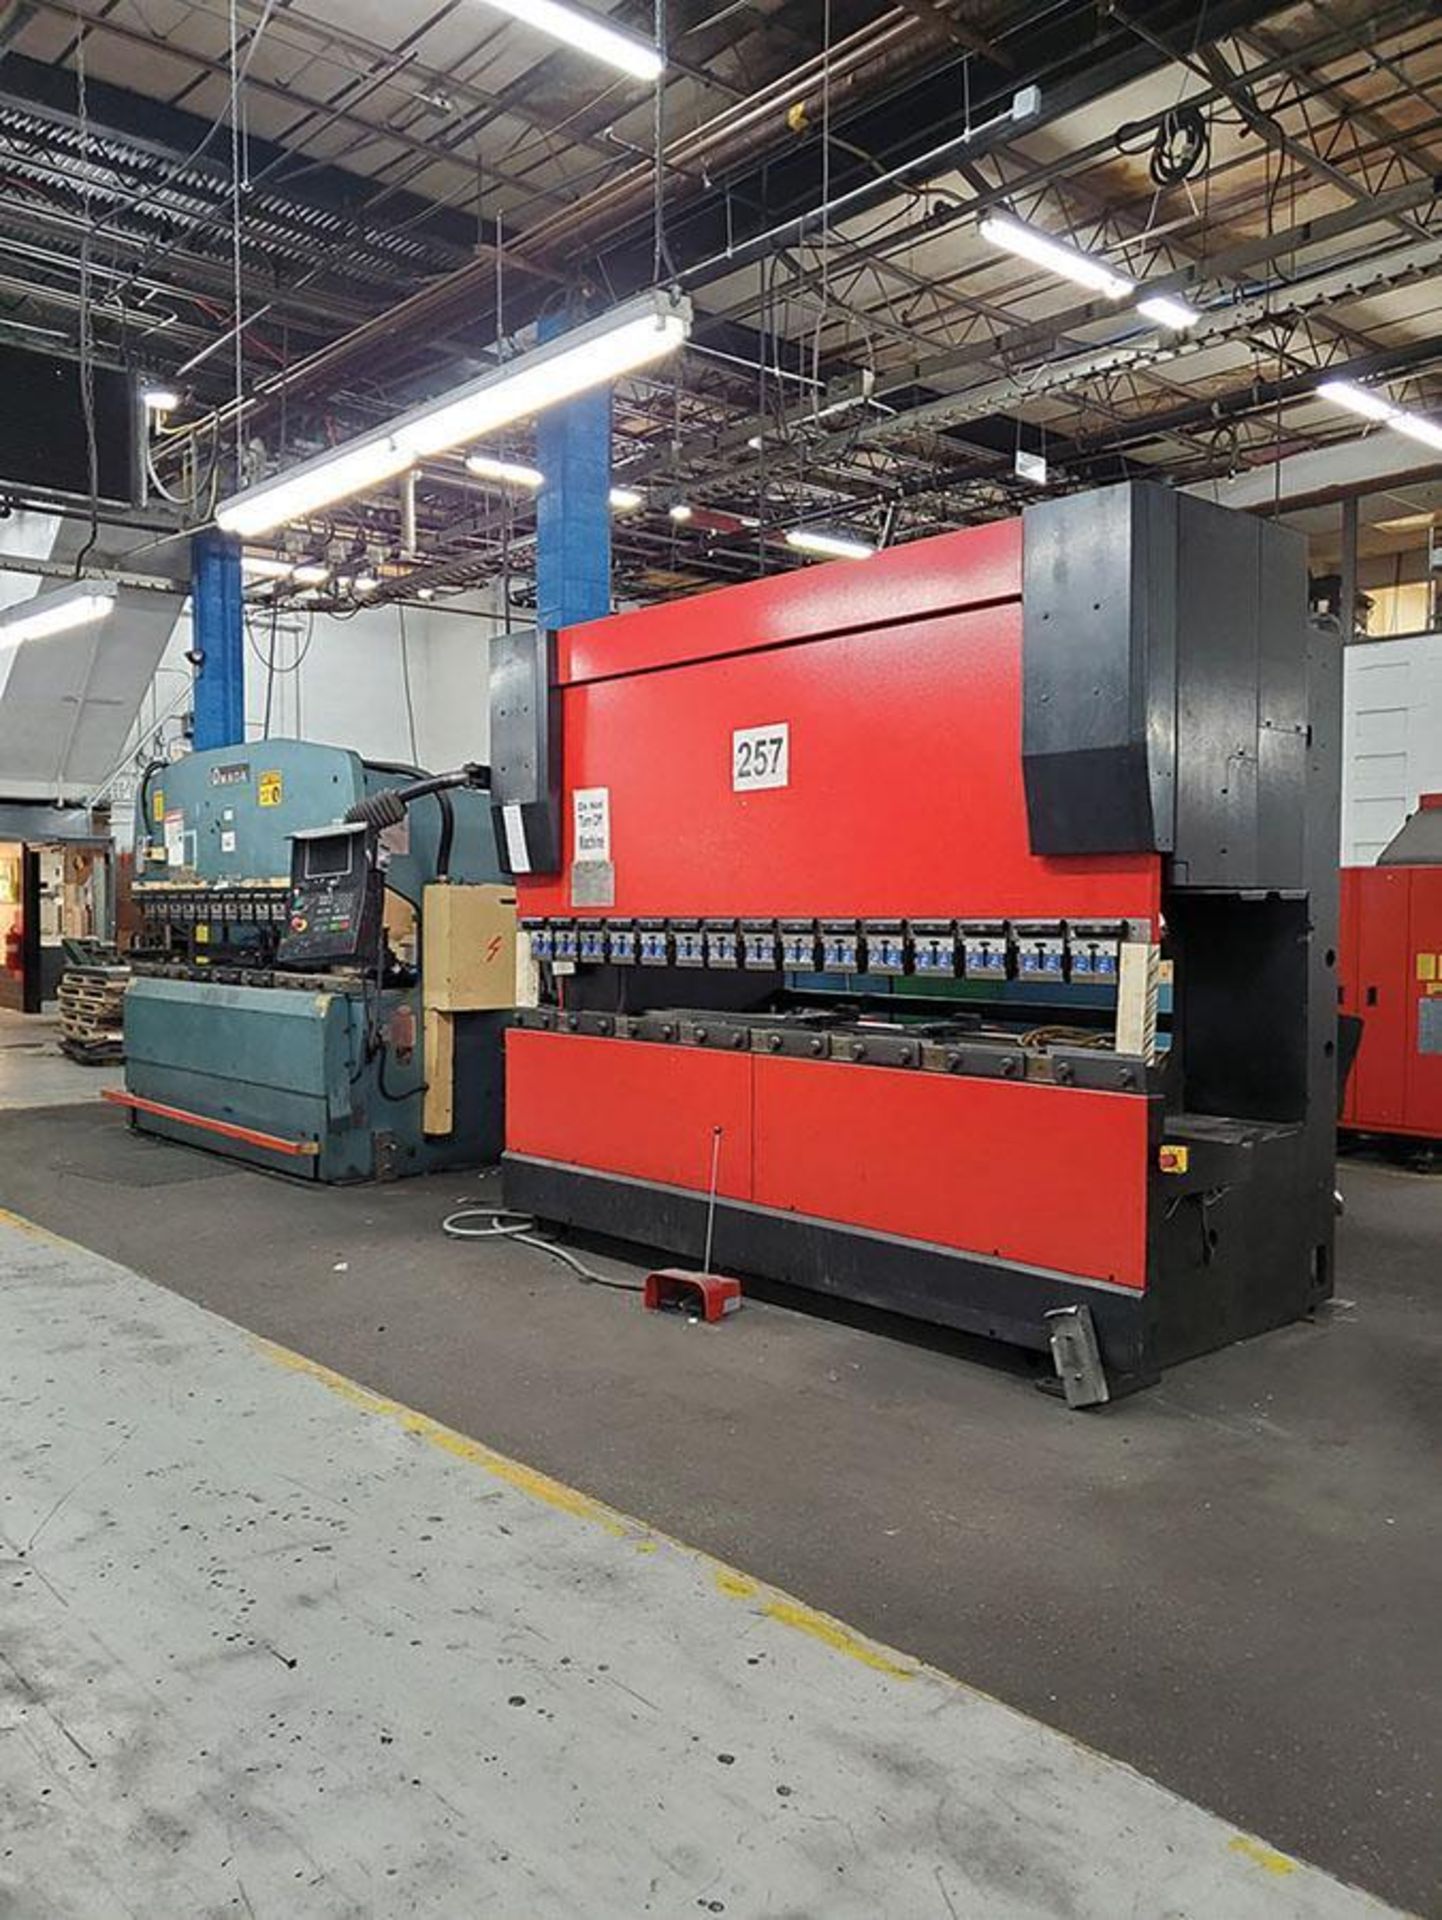 2001 AMADA HFE 100-3S CNC PRESS BRAKE, S/N HFE 100-3S V010635, 1000KN, 200MM, 460V, 10' BED, DUAL FO - Image 5 of 10